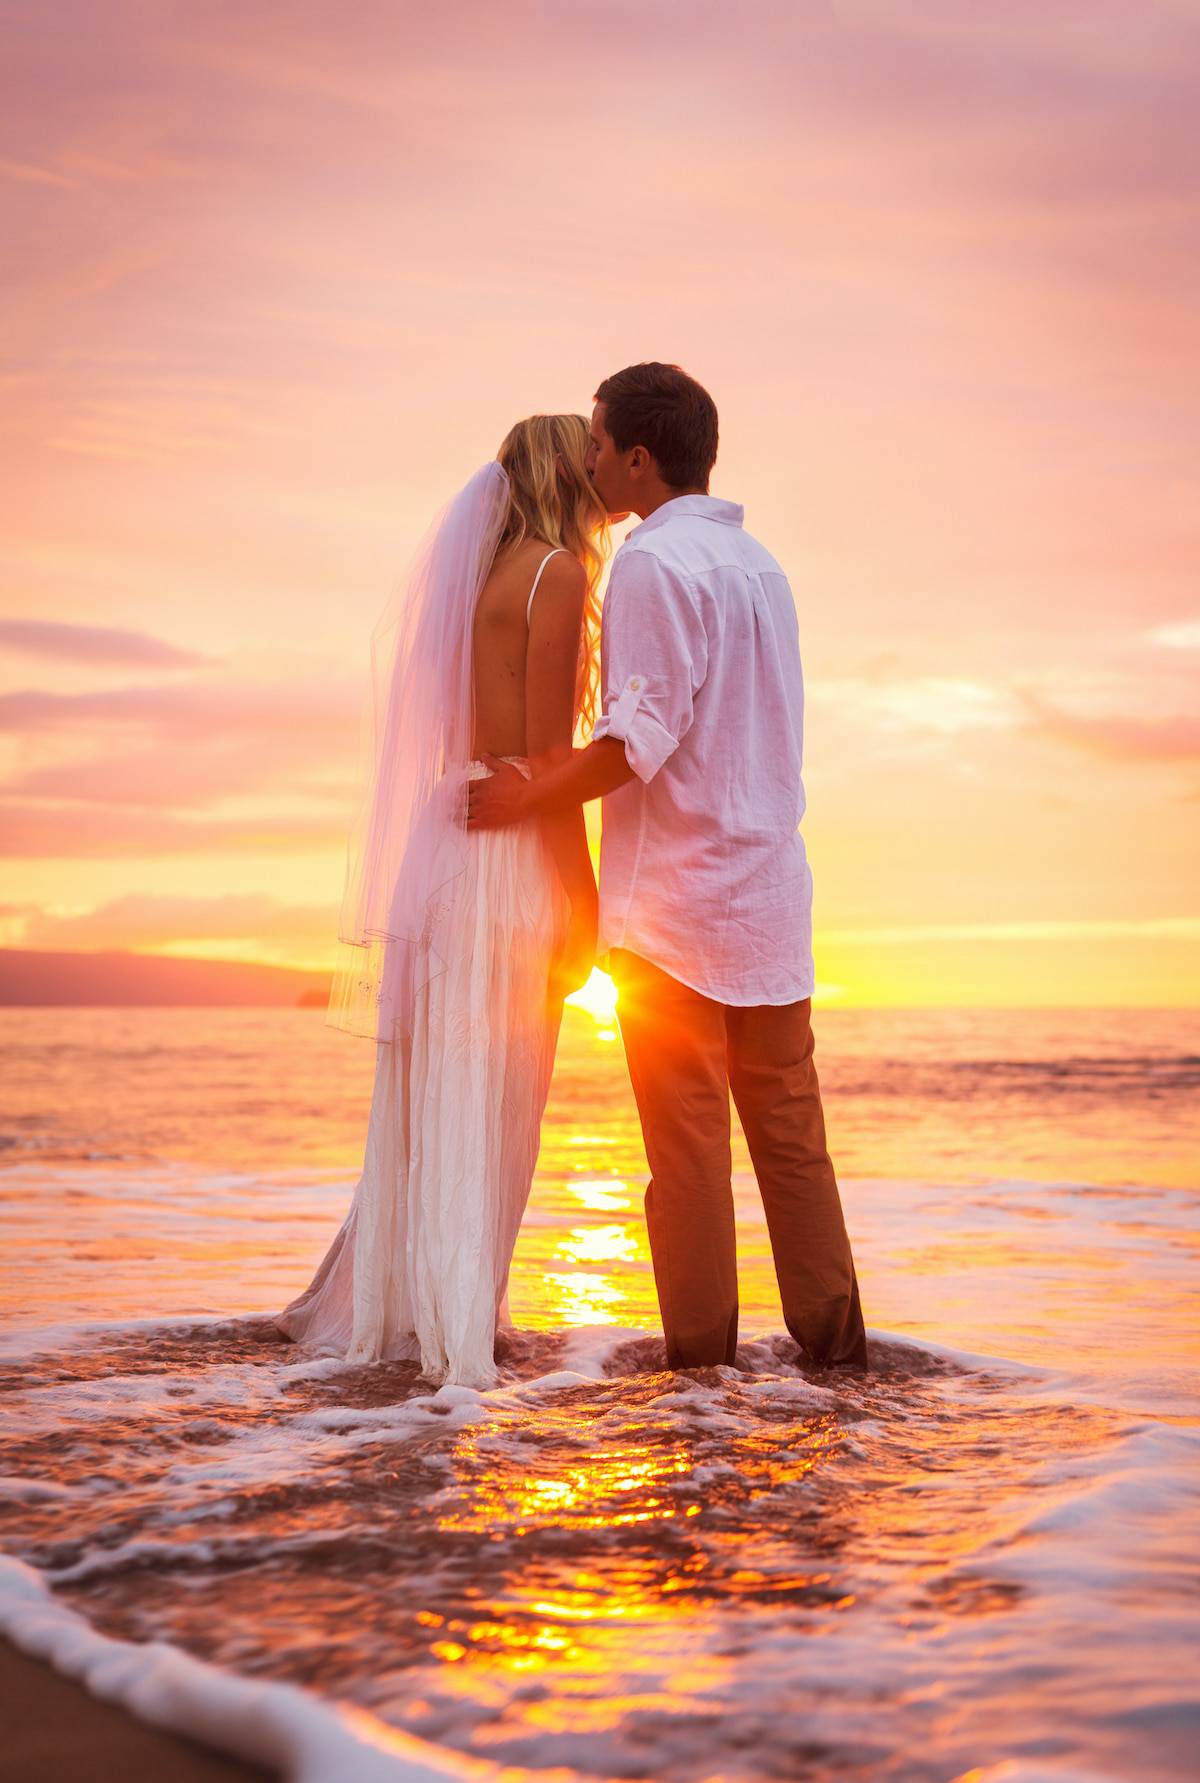 Bride and Groom, Enjoying Amazing Sunset on a Beautiful Tropical Beach, Romantic Married Couple Kissing